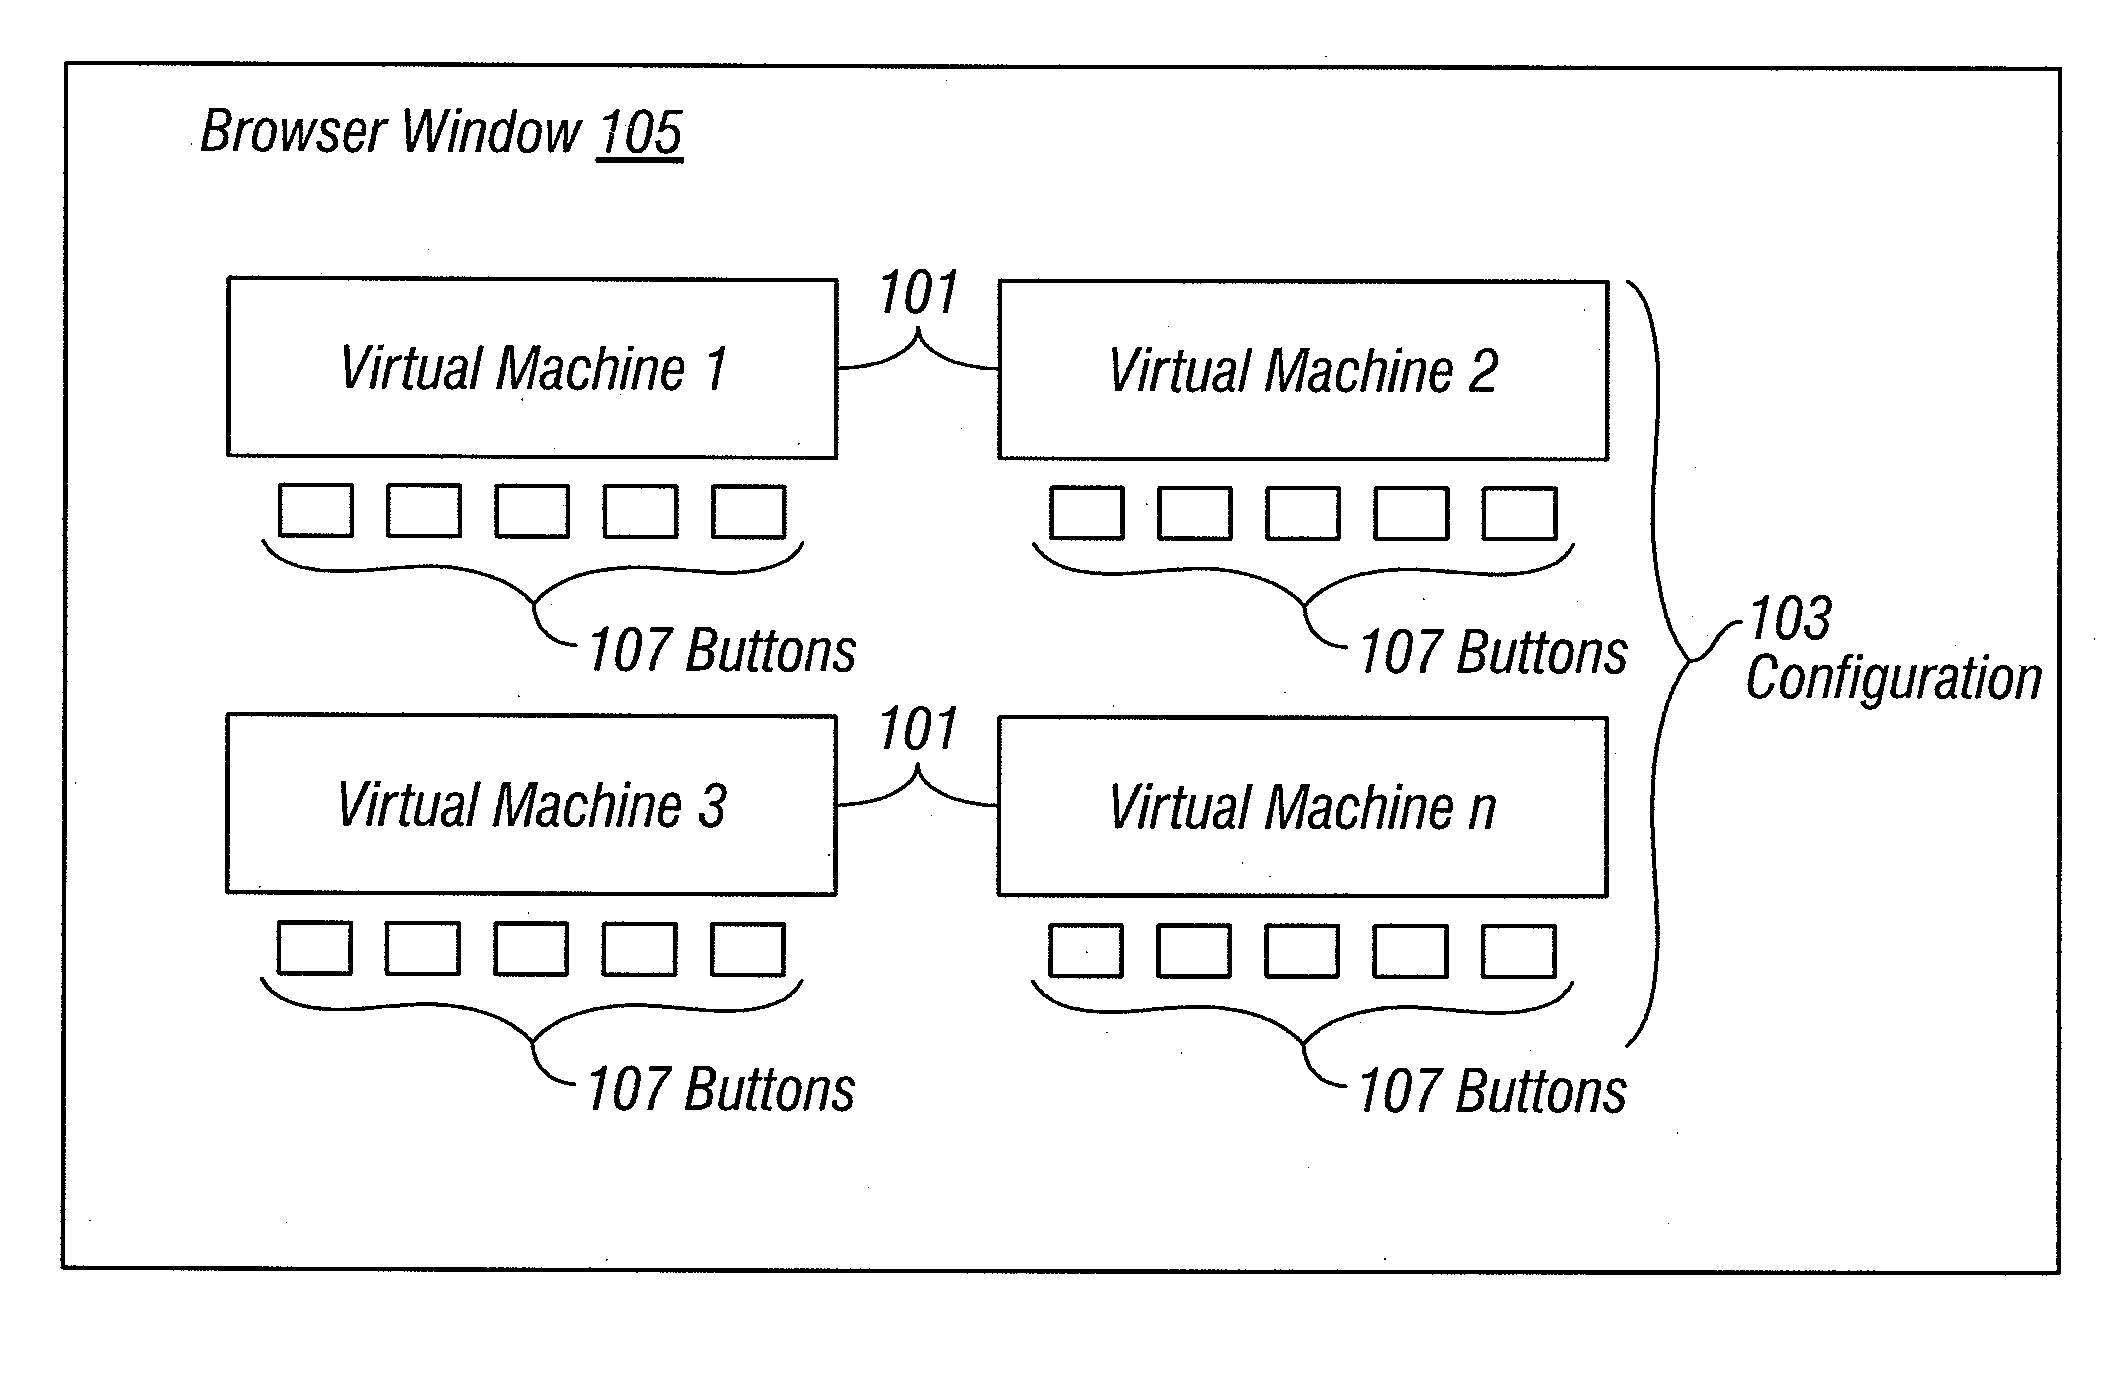 Multiple virtual machine consoles in a single interface